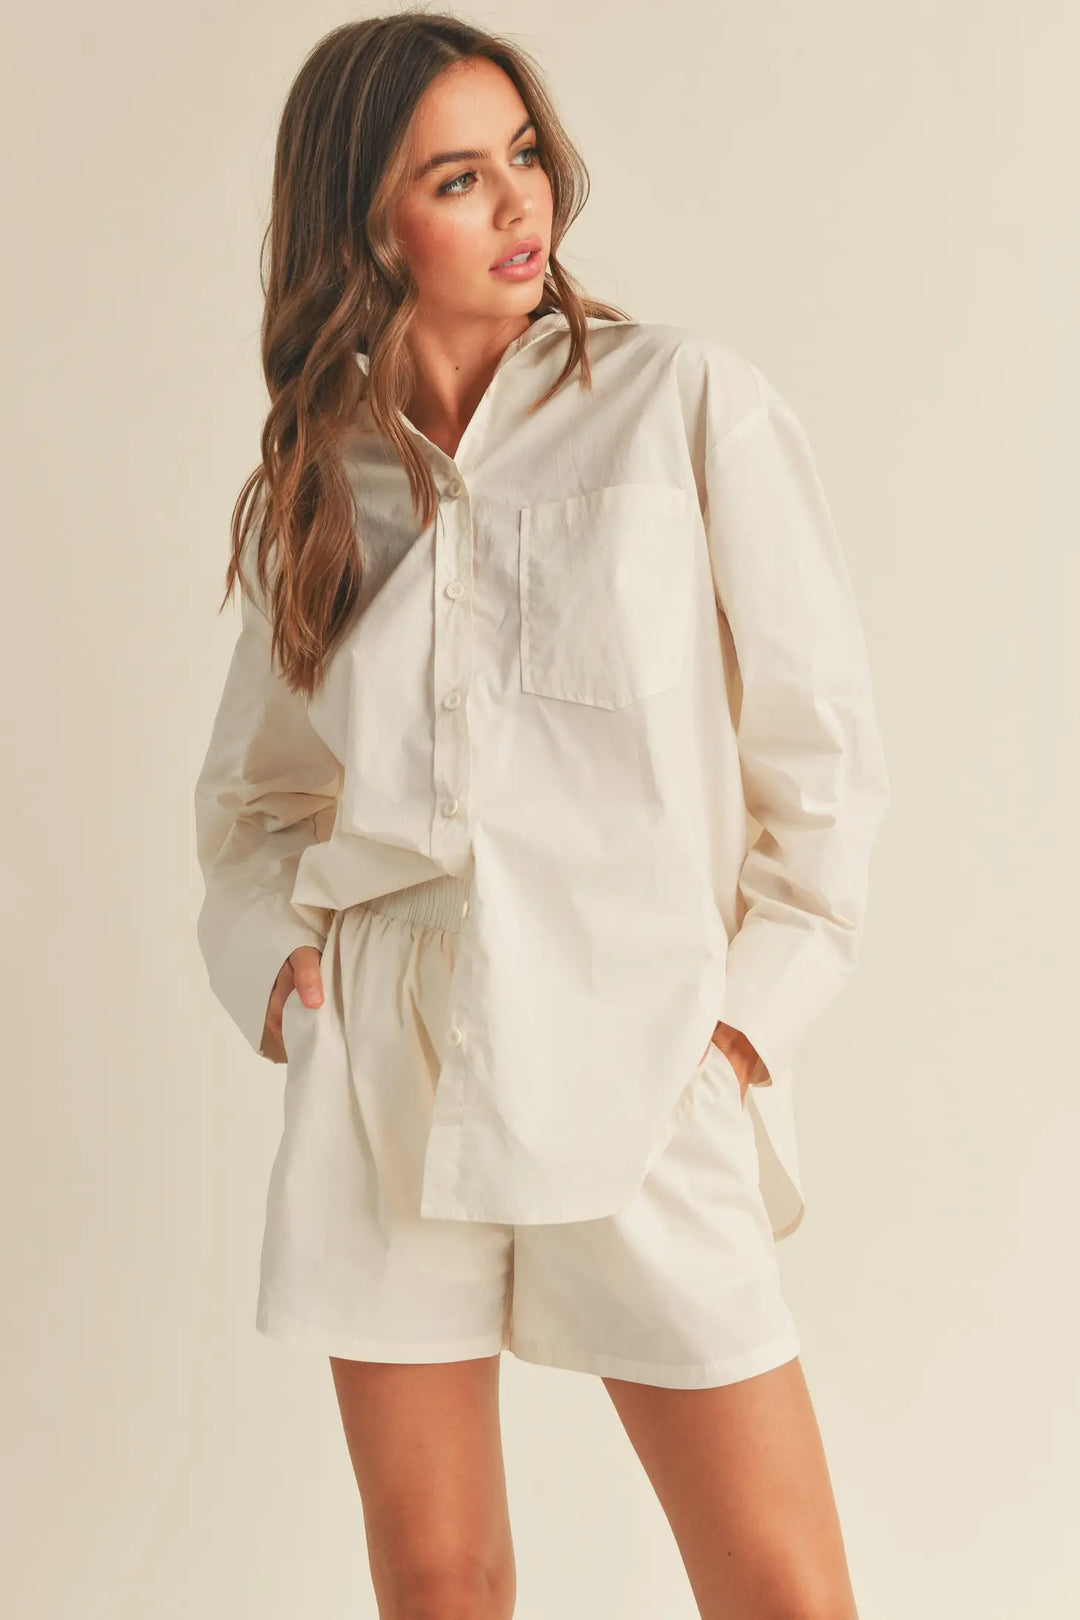 Breezy Button-Down Shirt in Pale Pink